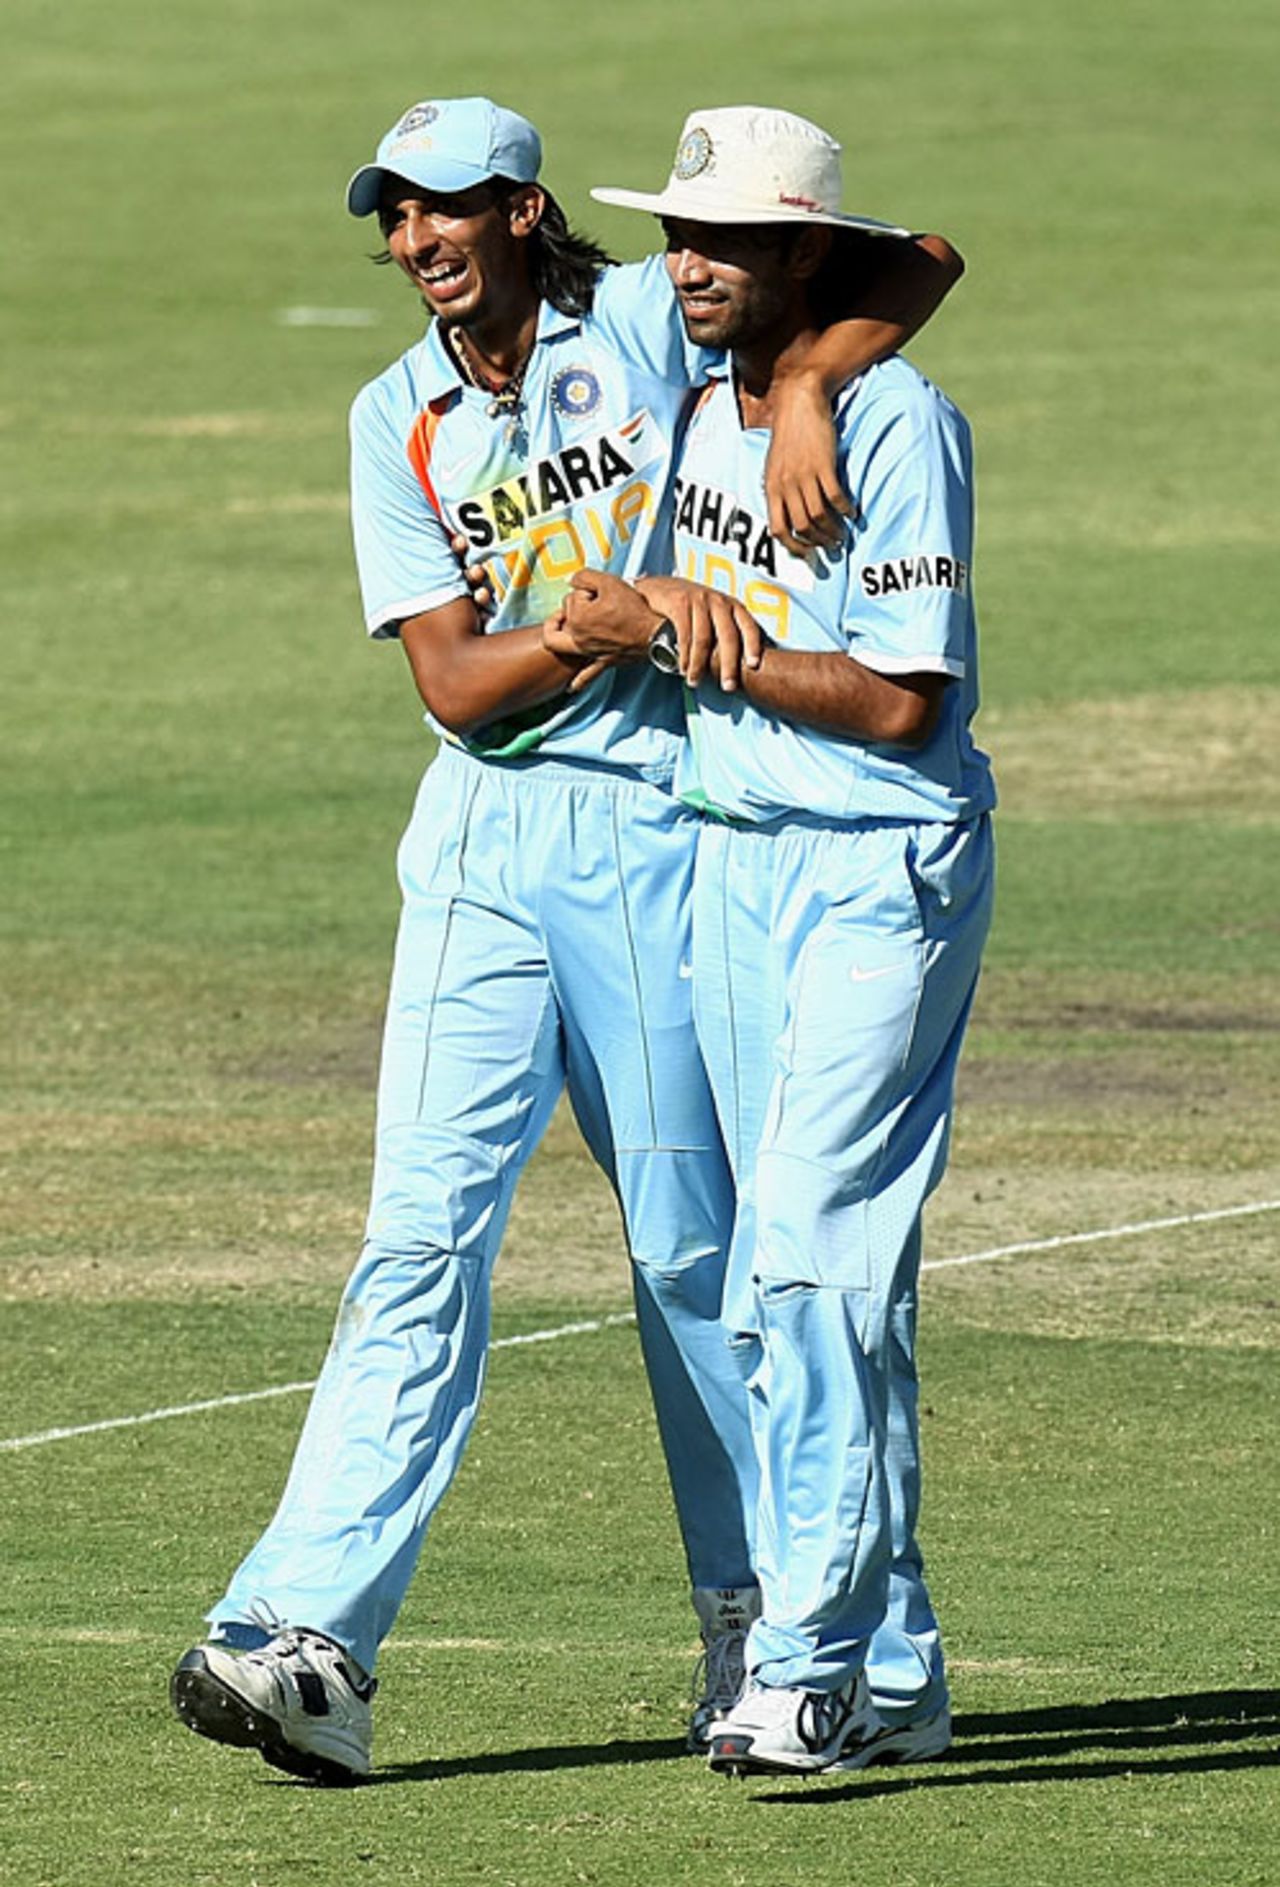 Ishant Sharma and Munaf Patel are all smiles after a good day on the field, Australia v India, 7th match, CB Series, Adelaide, February 17, 2008